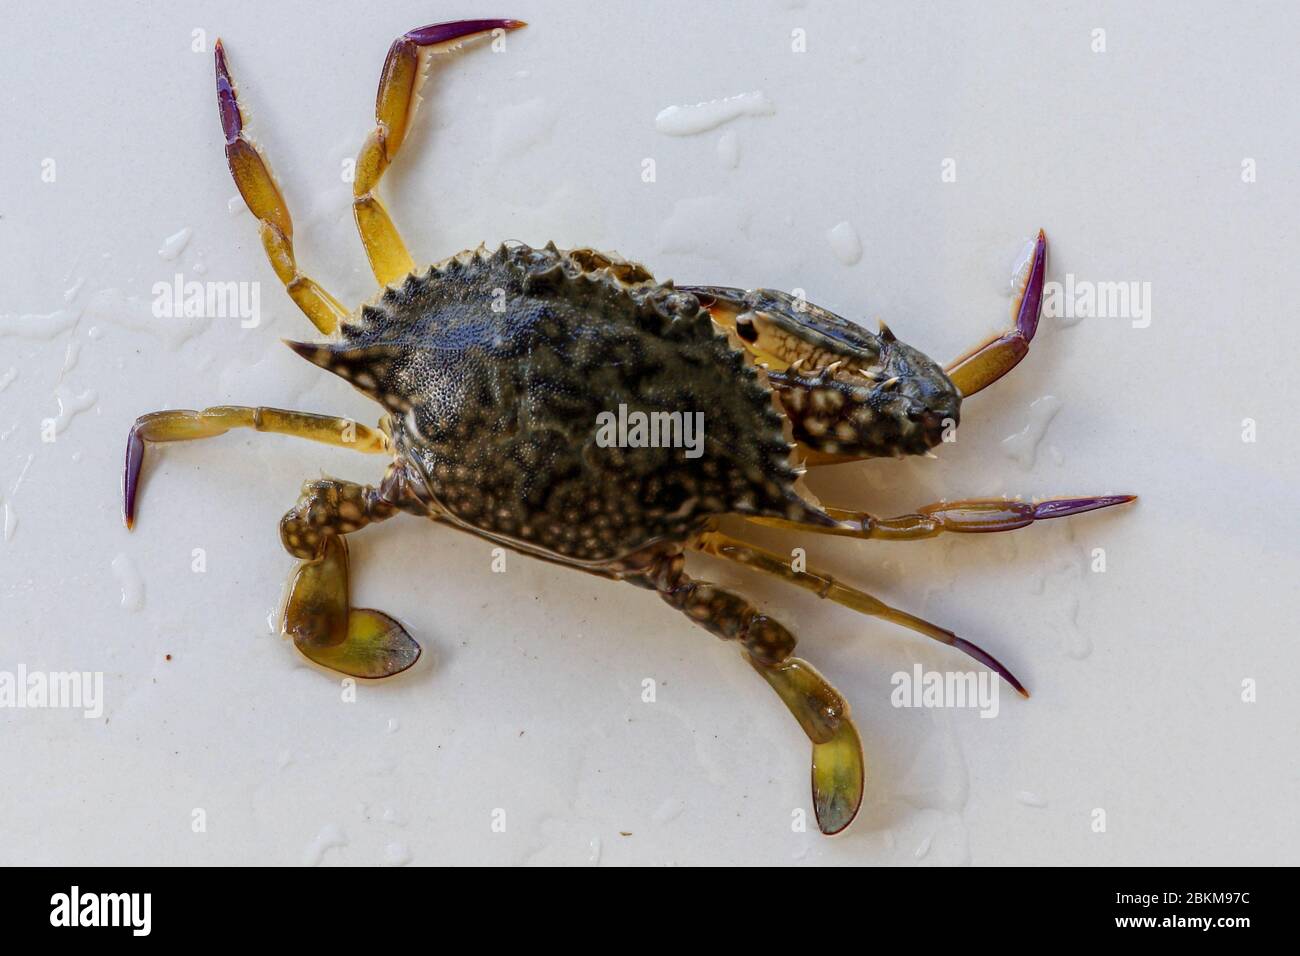 Dorsal view of Blue Manna crab, Sand crab. Flower crab. Portunus pelagicus isolated on a white background. Close-up photo of fresh raw Blue swimming s Stock Photo